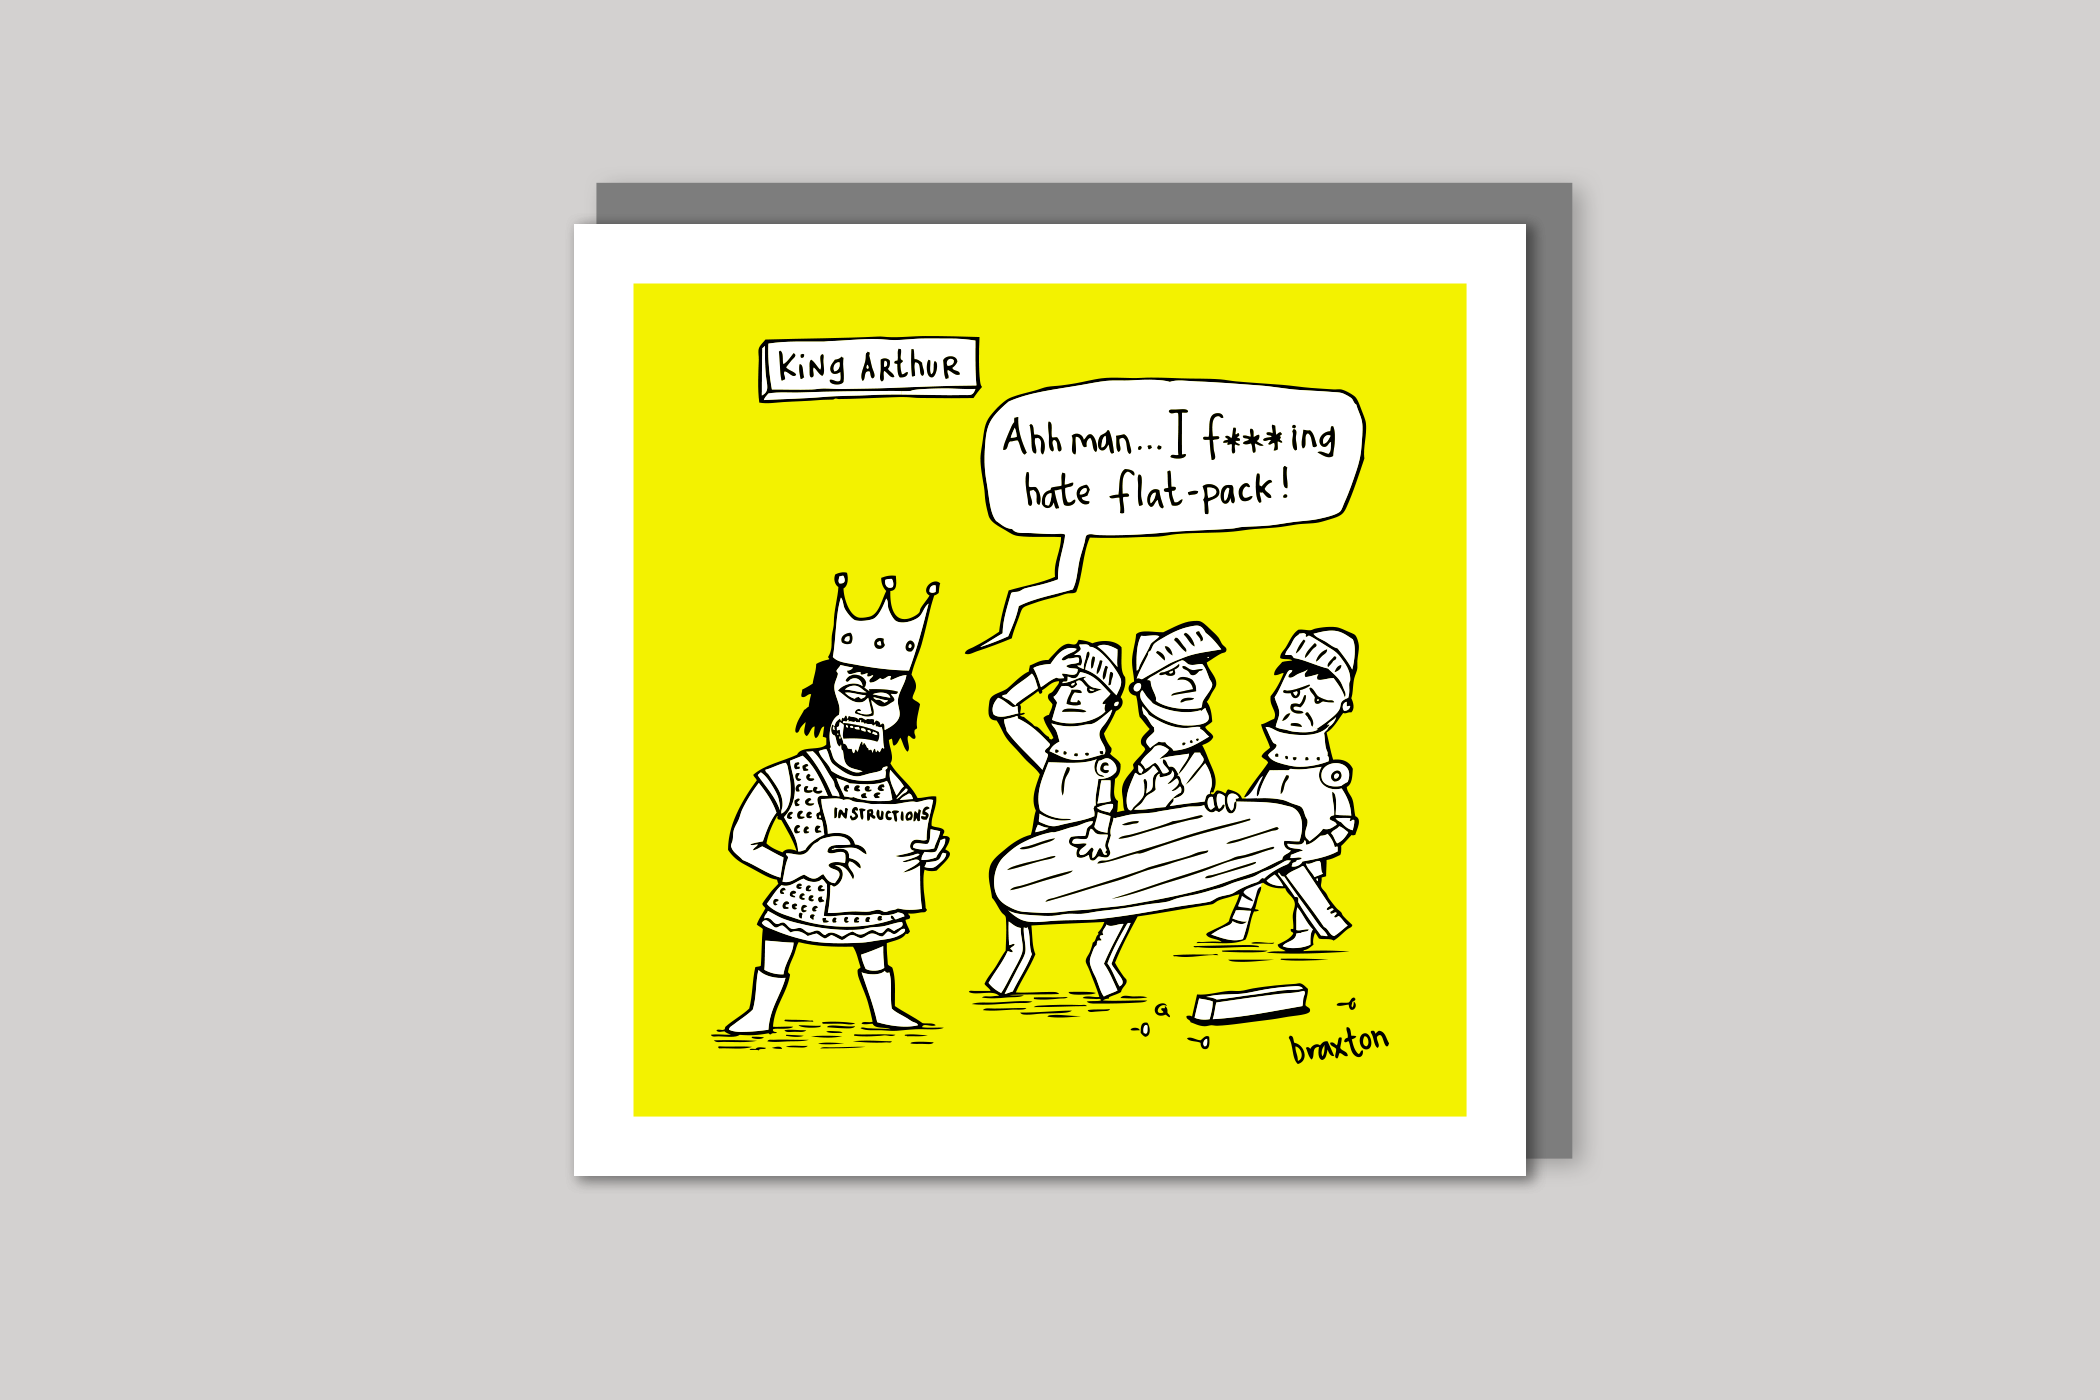 King Arthur humorous illustration from History of the World range of greeting cards by Icon, back page.